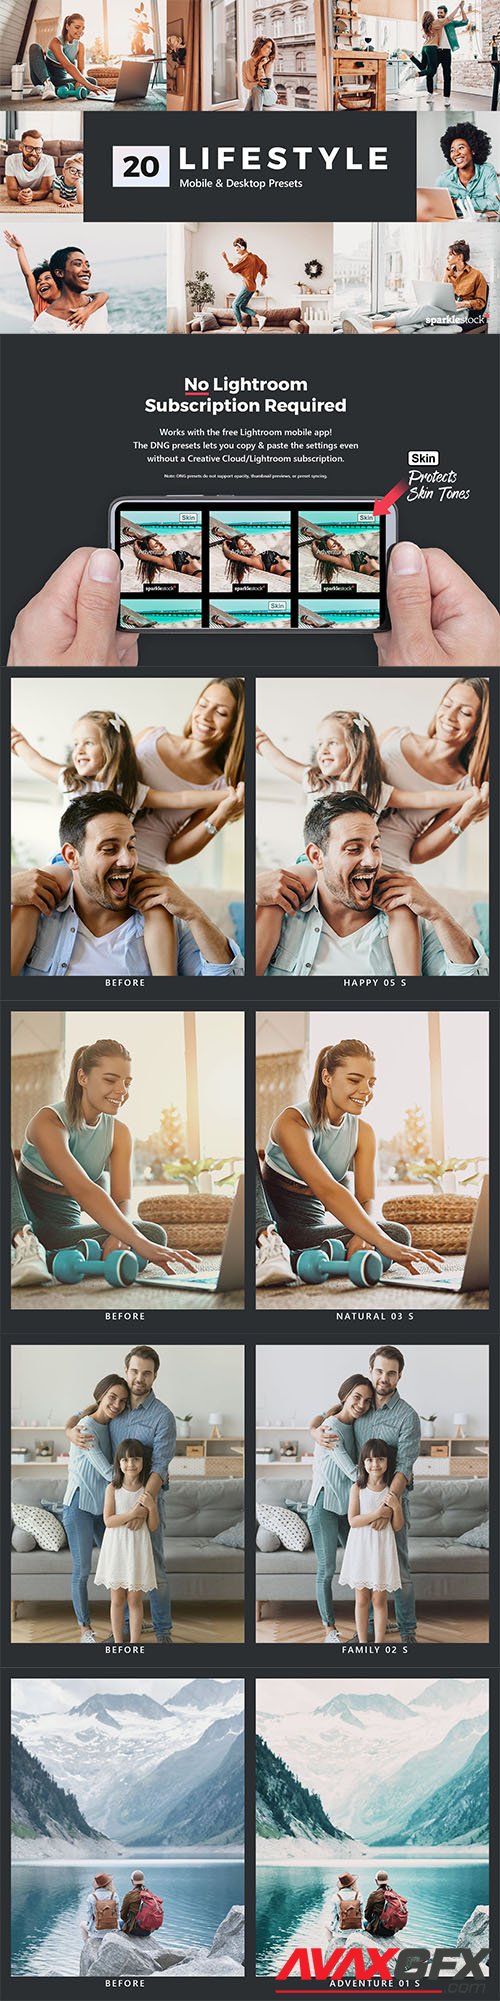 20 Lifestyle Lightroom Presets and LUTs